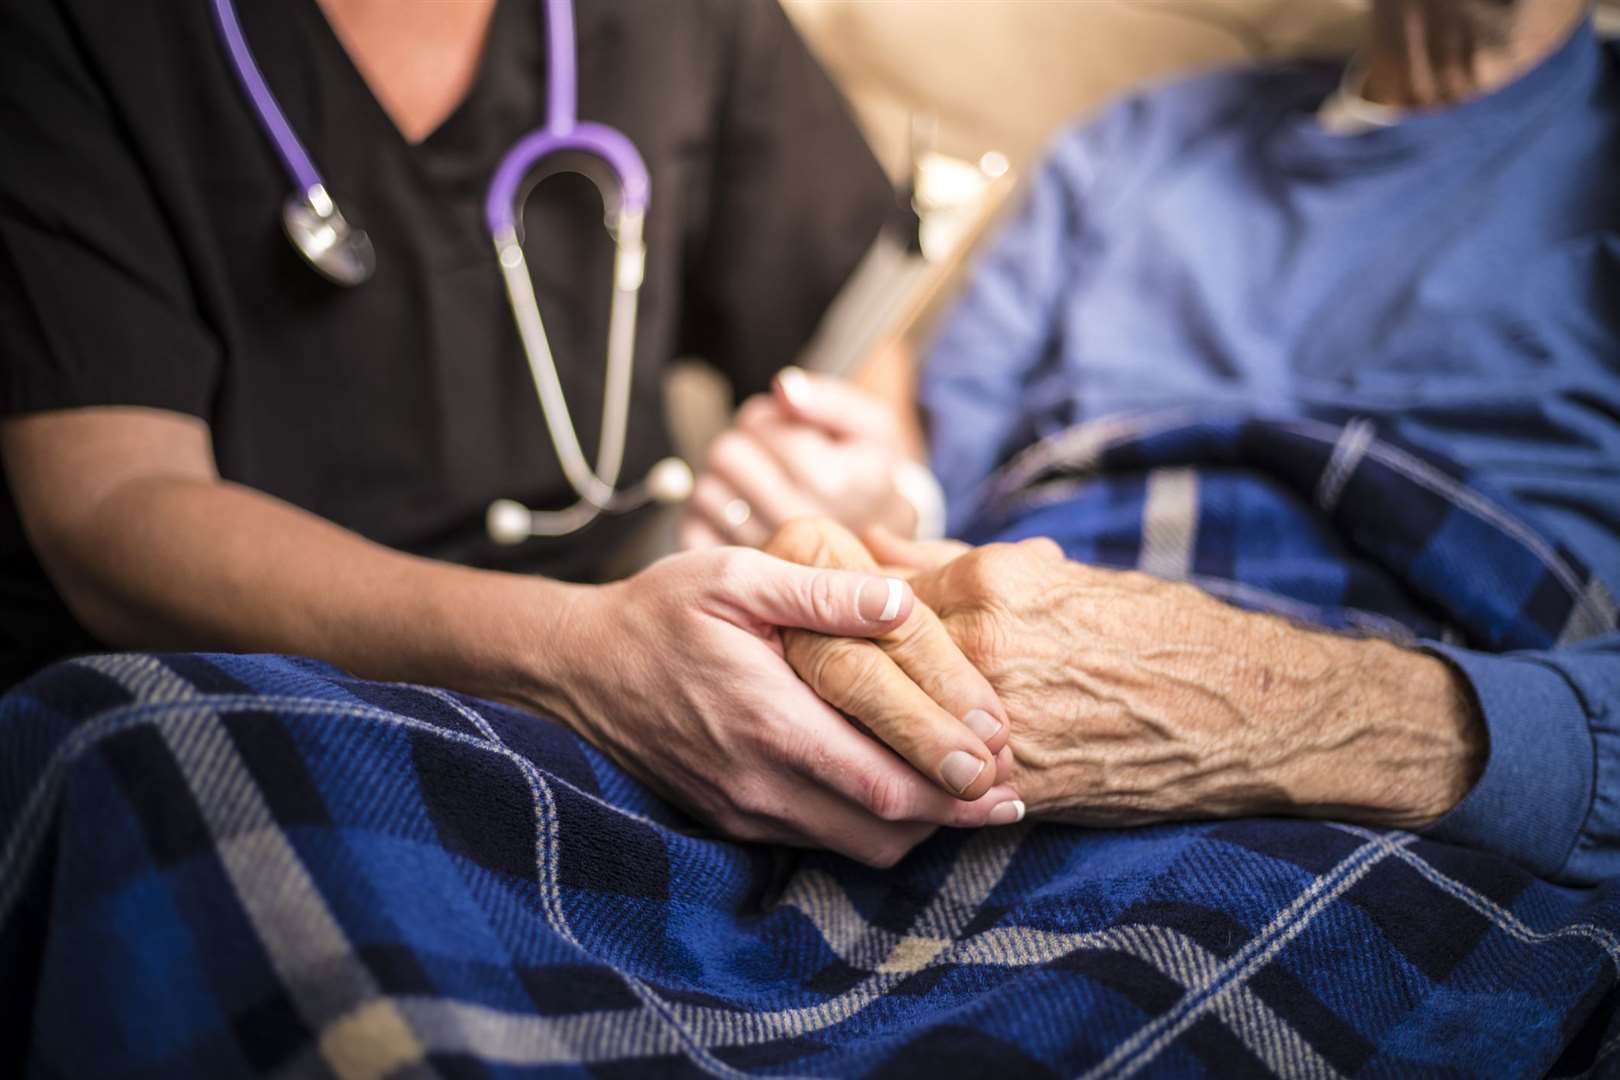 Barnes Lodge is a nursing home for people who have complex health needs. Stock image